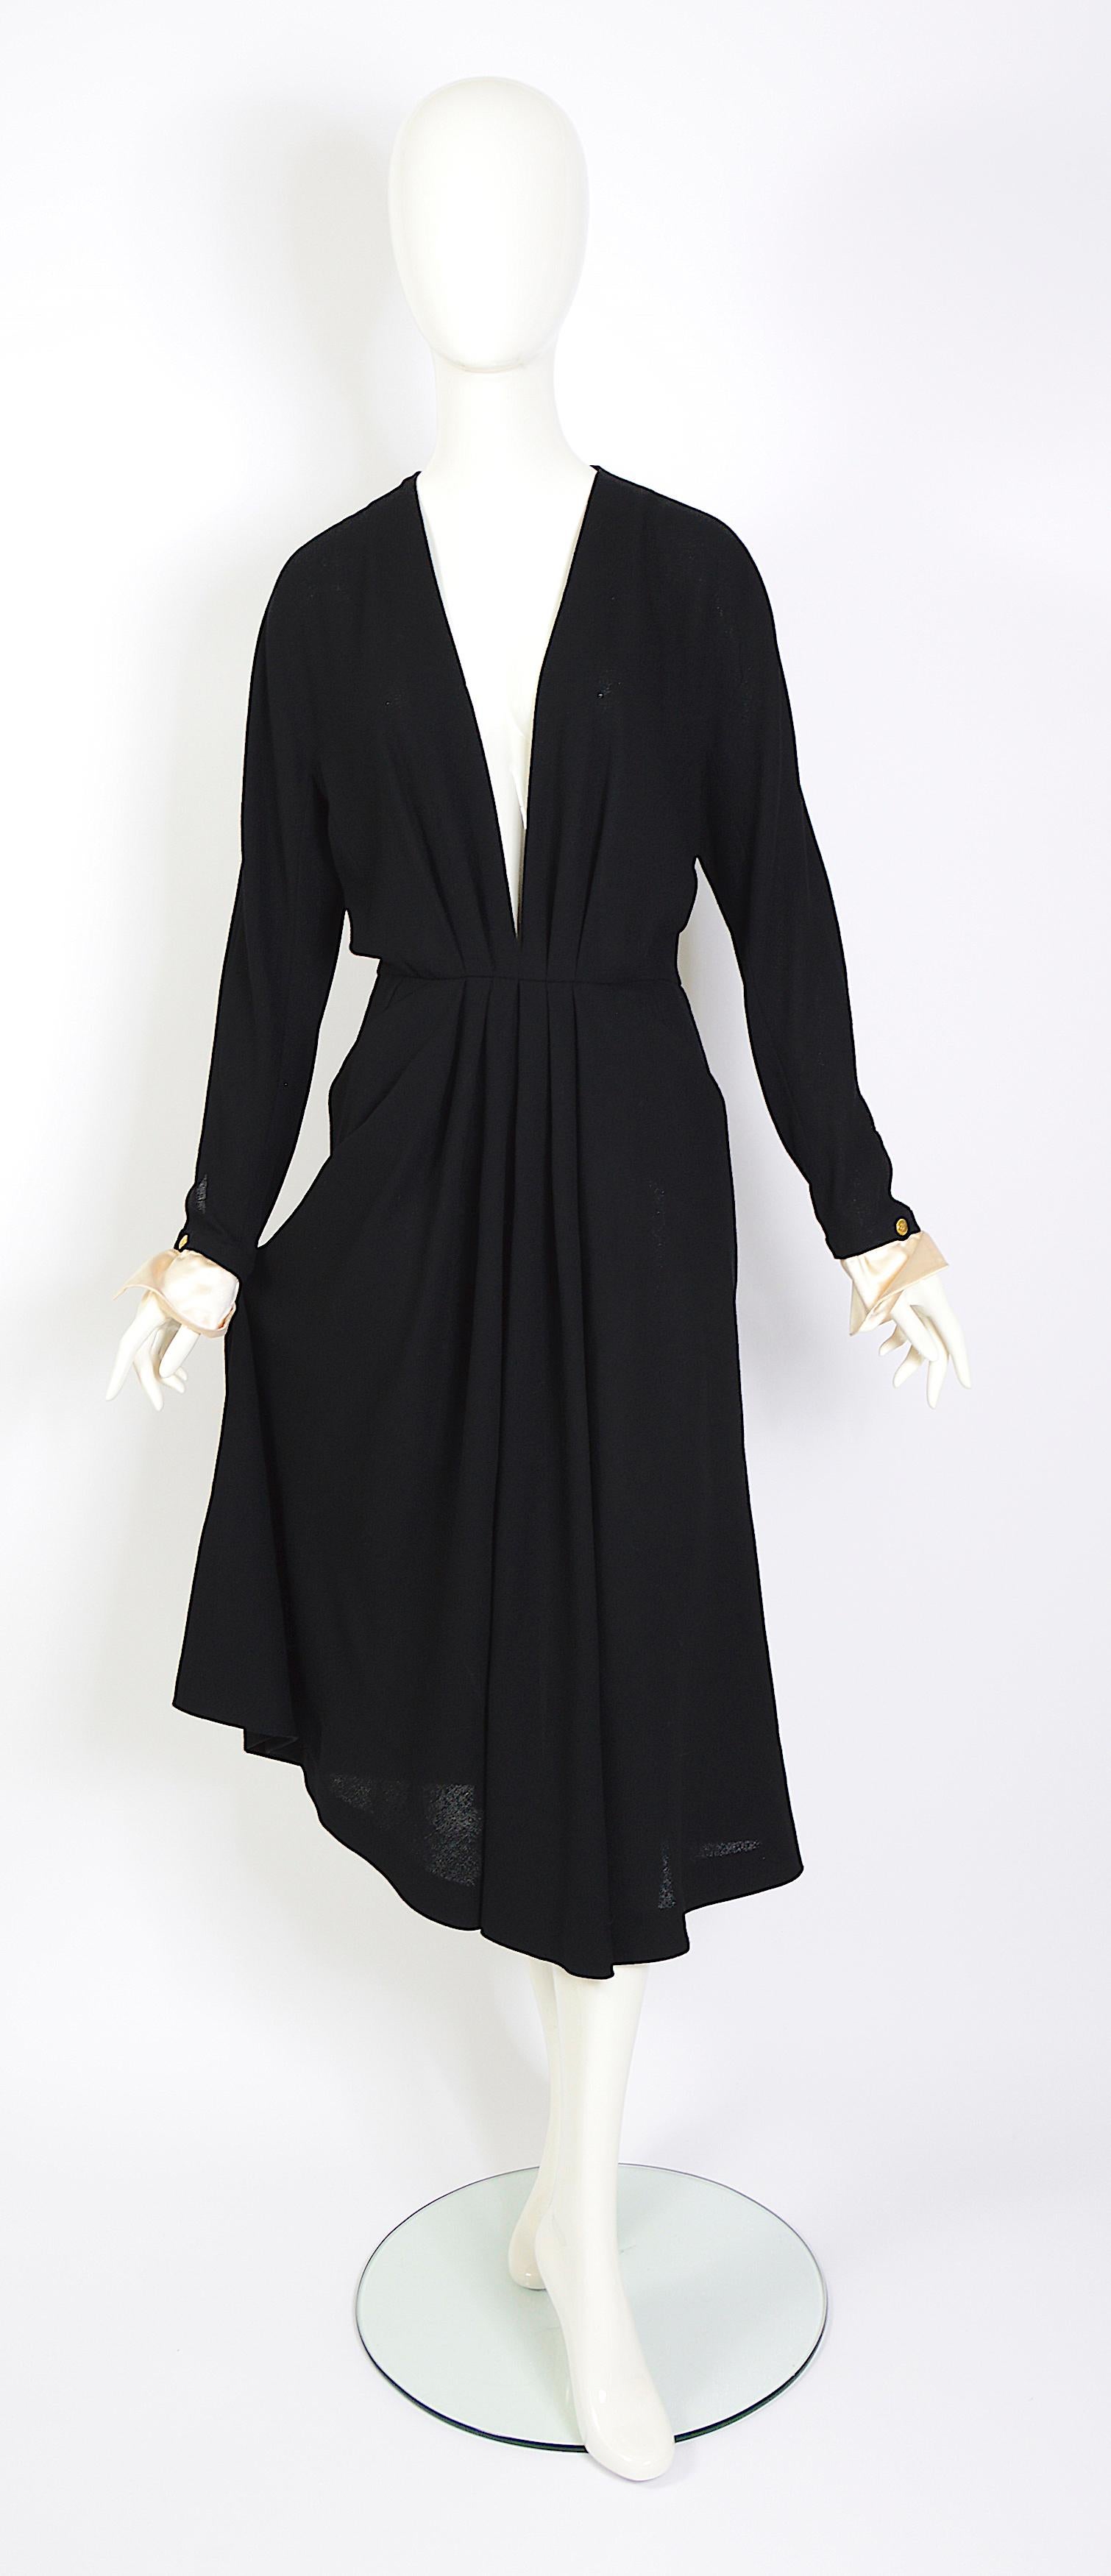 Chanel Boutique vintage 80s black deep v-neck pleated crepe dress with detachable white satin cuffs. Designed by Karl Lagerfeld, you feel the old-school Chanel and Ines de la Fressanges decade. 
The elegance and beauty of this dress are truly